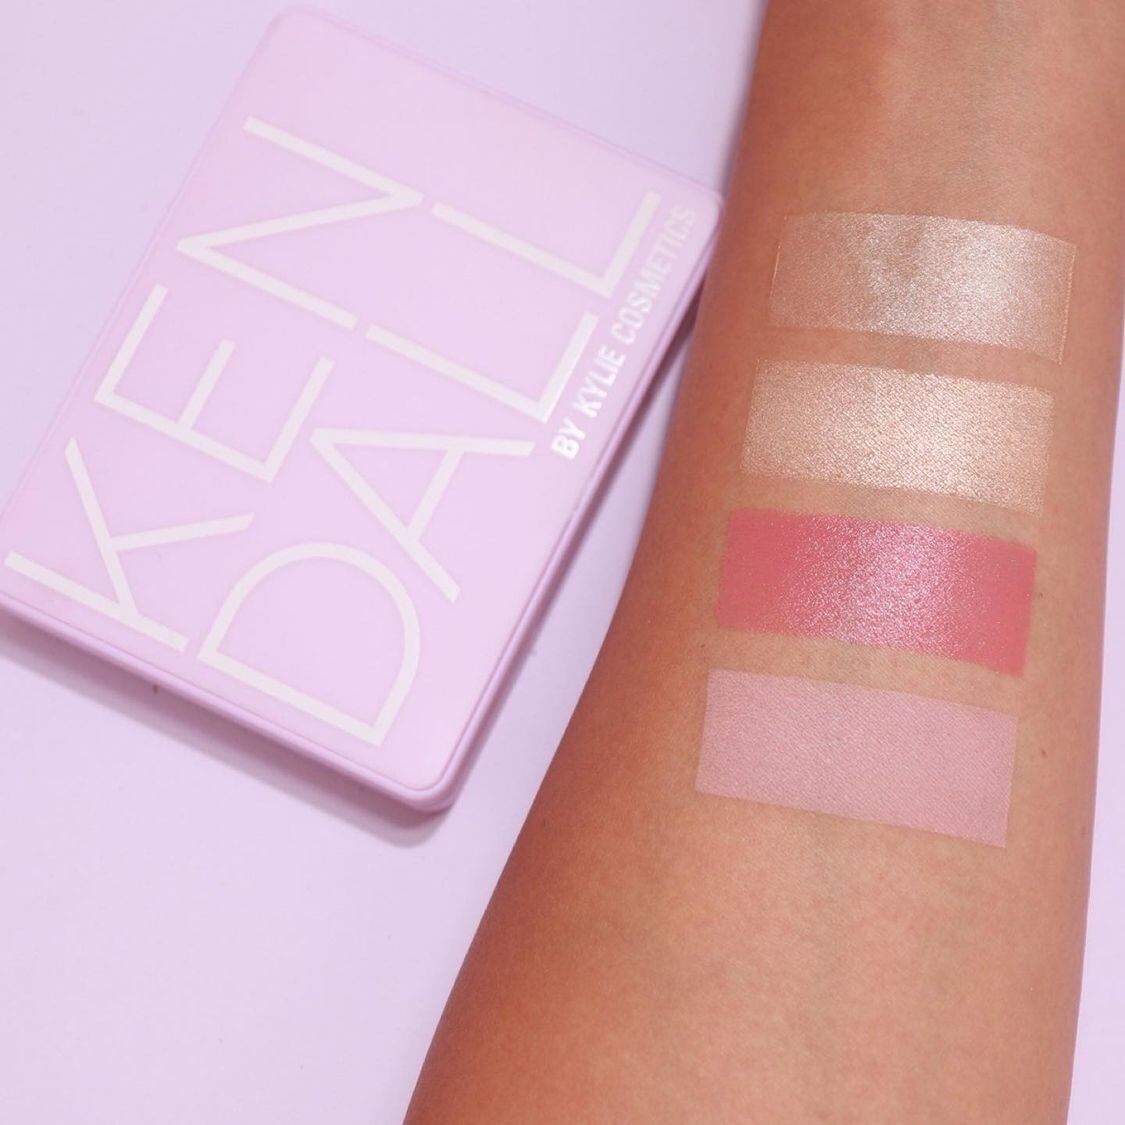 Kylie Cosmetics KENDALL COLLECTION BLUSH & HIGHTLIGHTER PALETTE